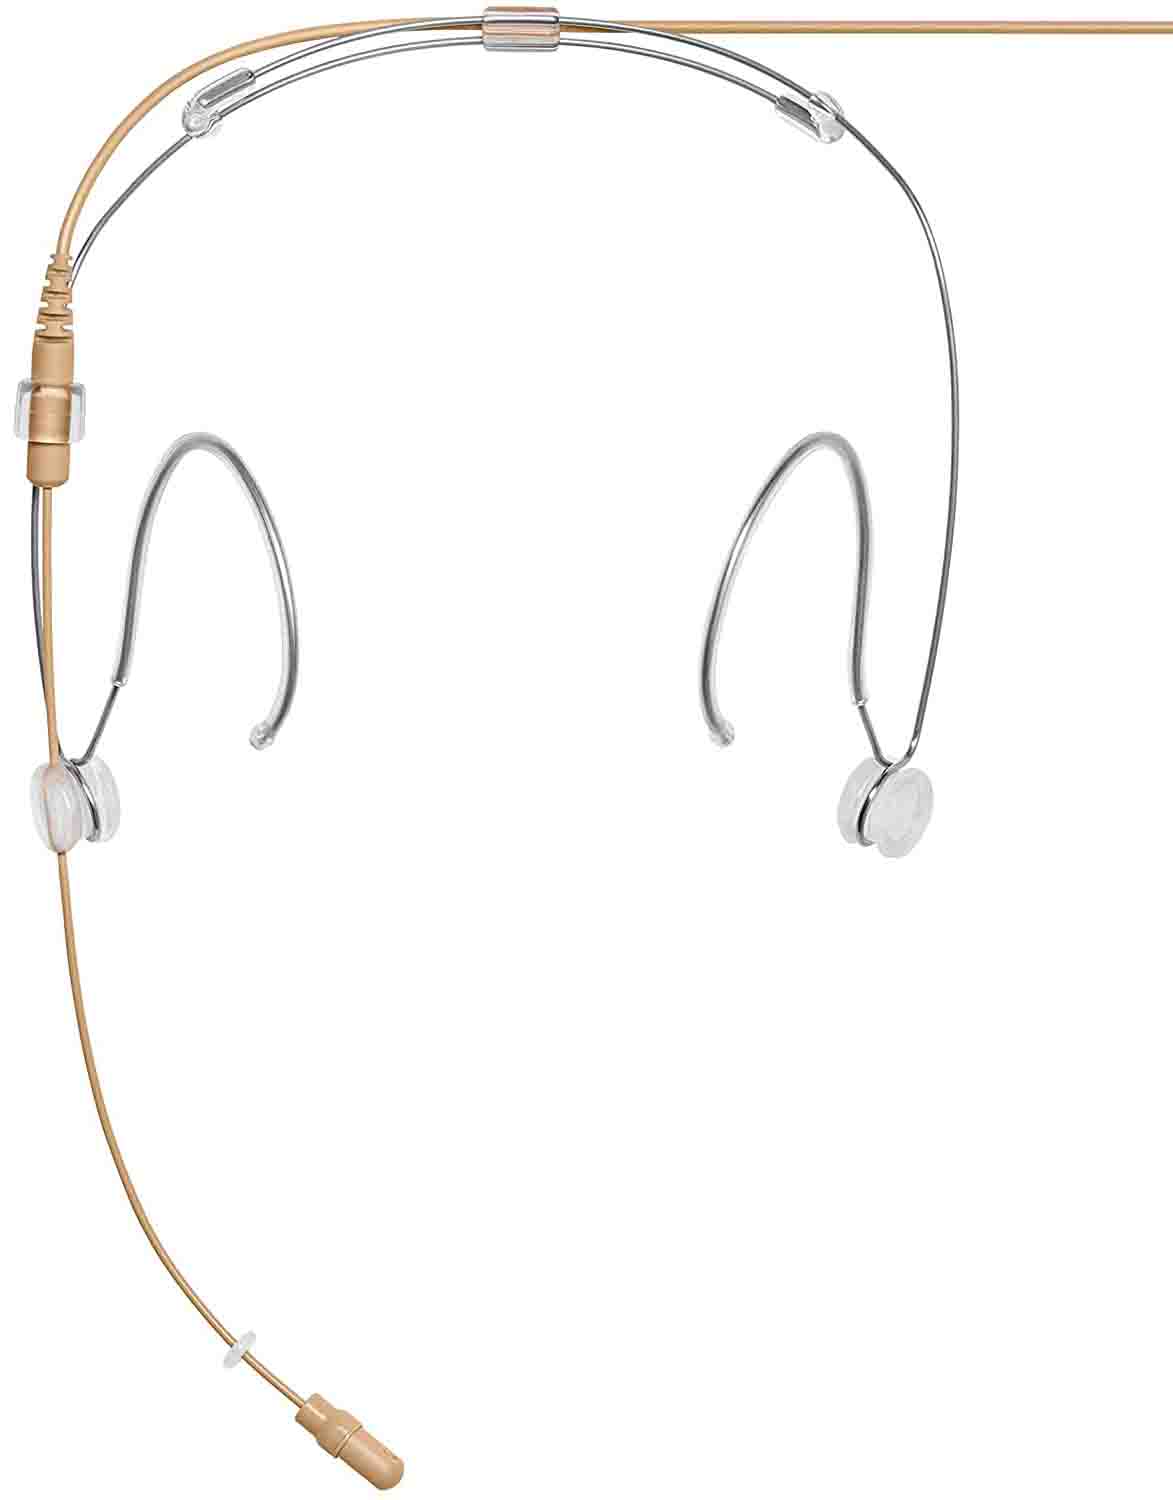 Shure RPMDH5T/O DuraPlex Headset Microphone with Boom Arm and Cable Assembly - Tan - Hollywood DJ